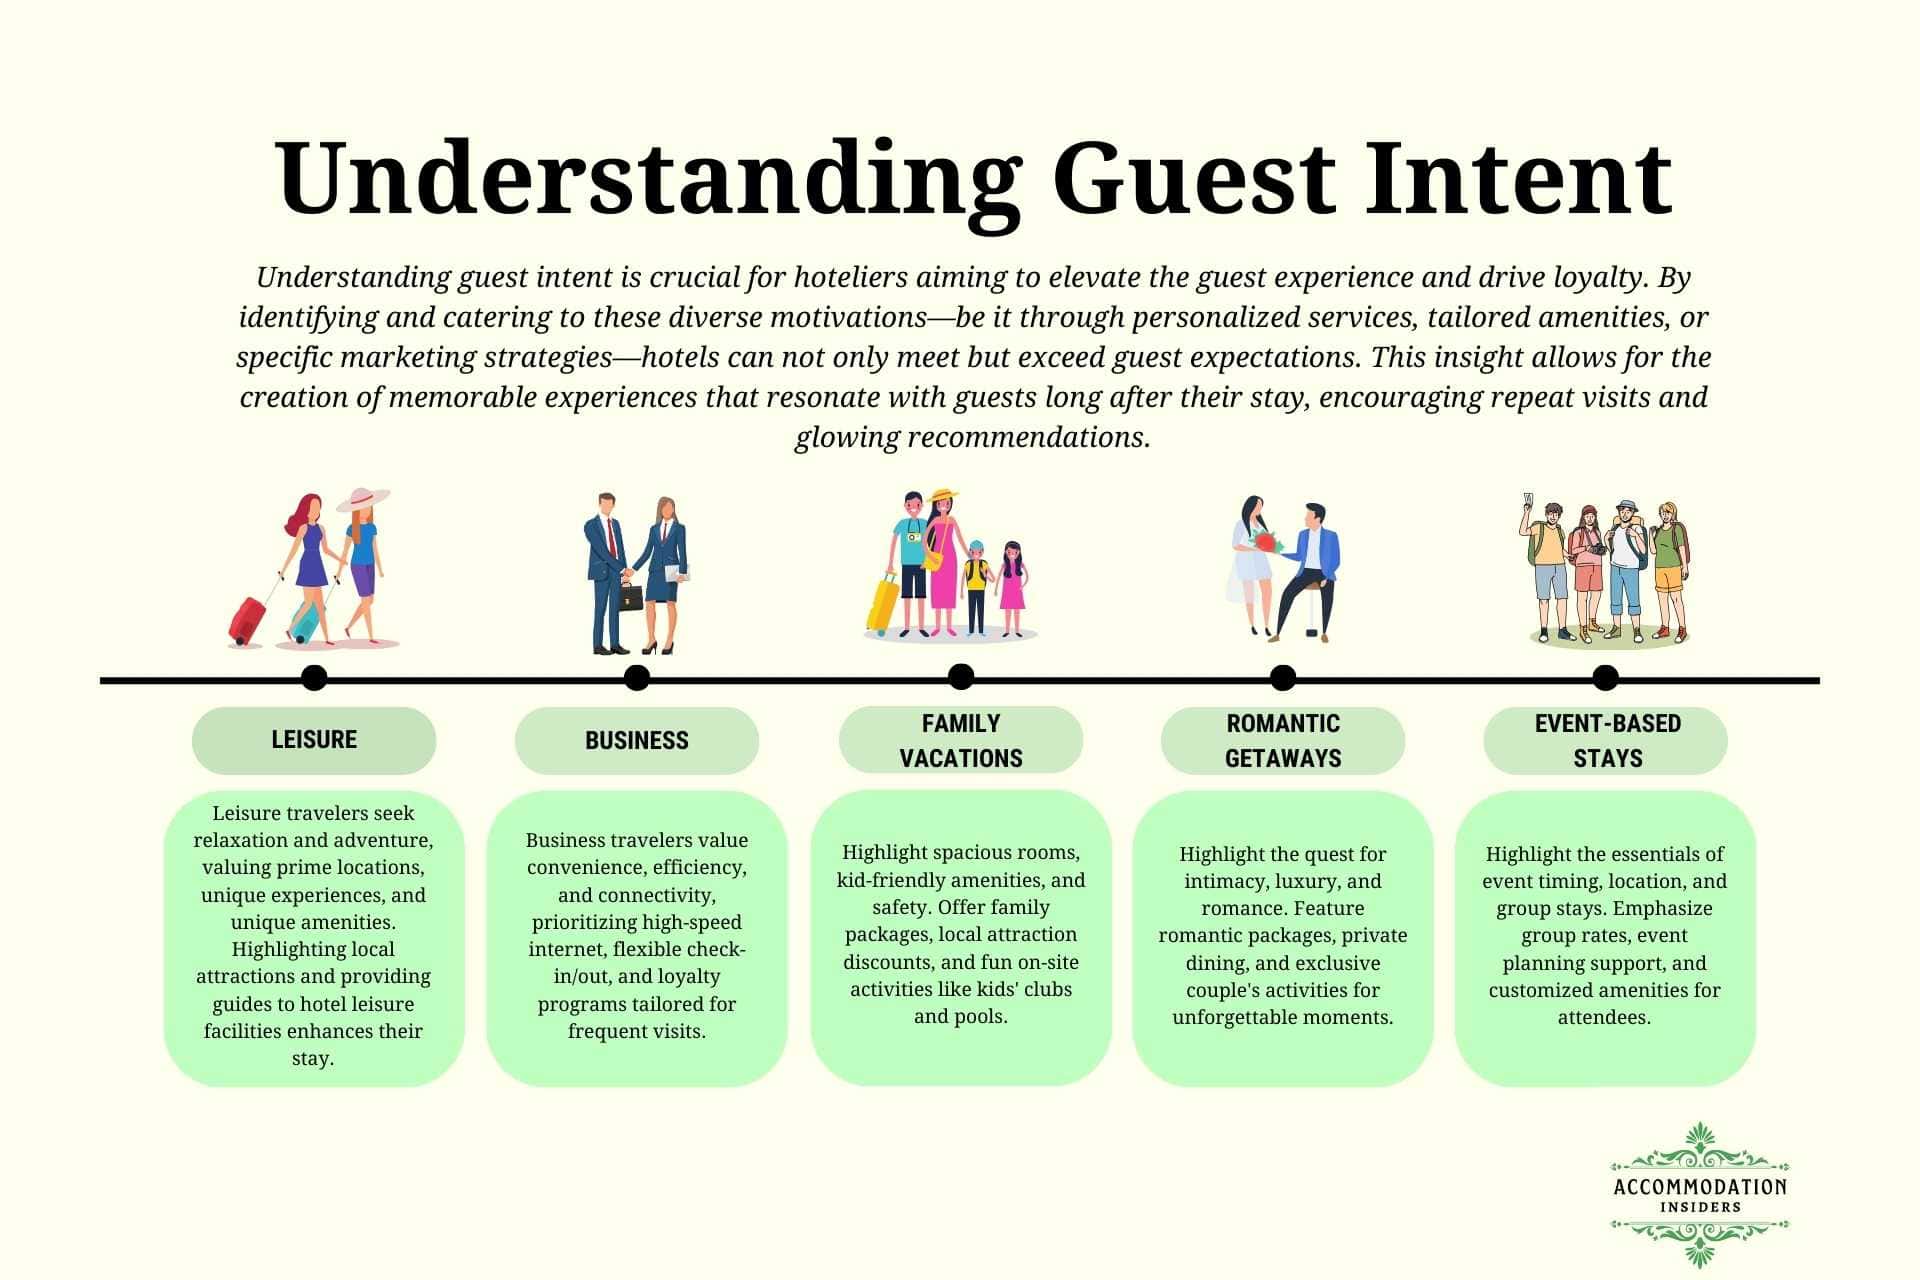 Infographic explaining 'guest intent in the hotel industry' with sections on leisure, business, family vacations, romantic getaways, and event-based stays. Each section includes tailored strategies like personalized services and amenities to improve guest experiences, illustrated with diverse groups of people representing each category. Logo of 'Accommodation Insiders' at the bottom.